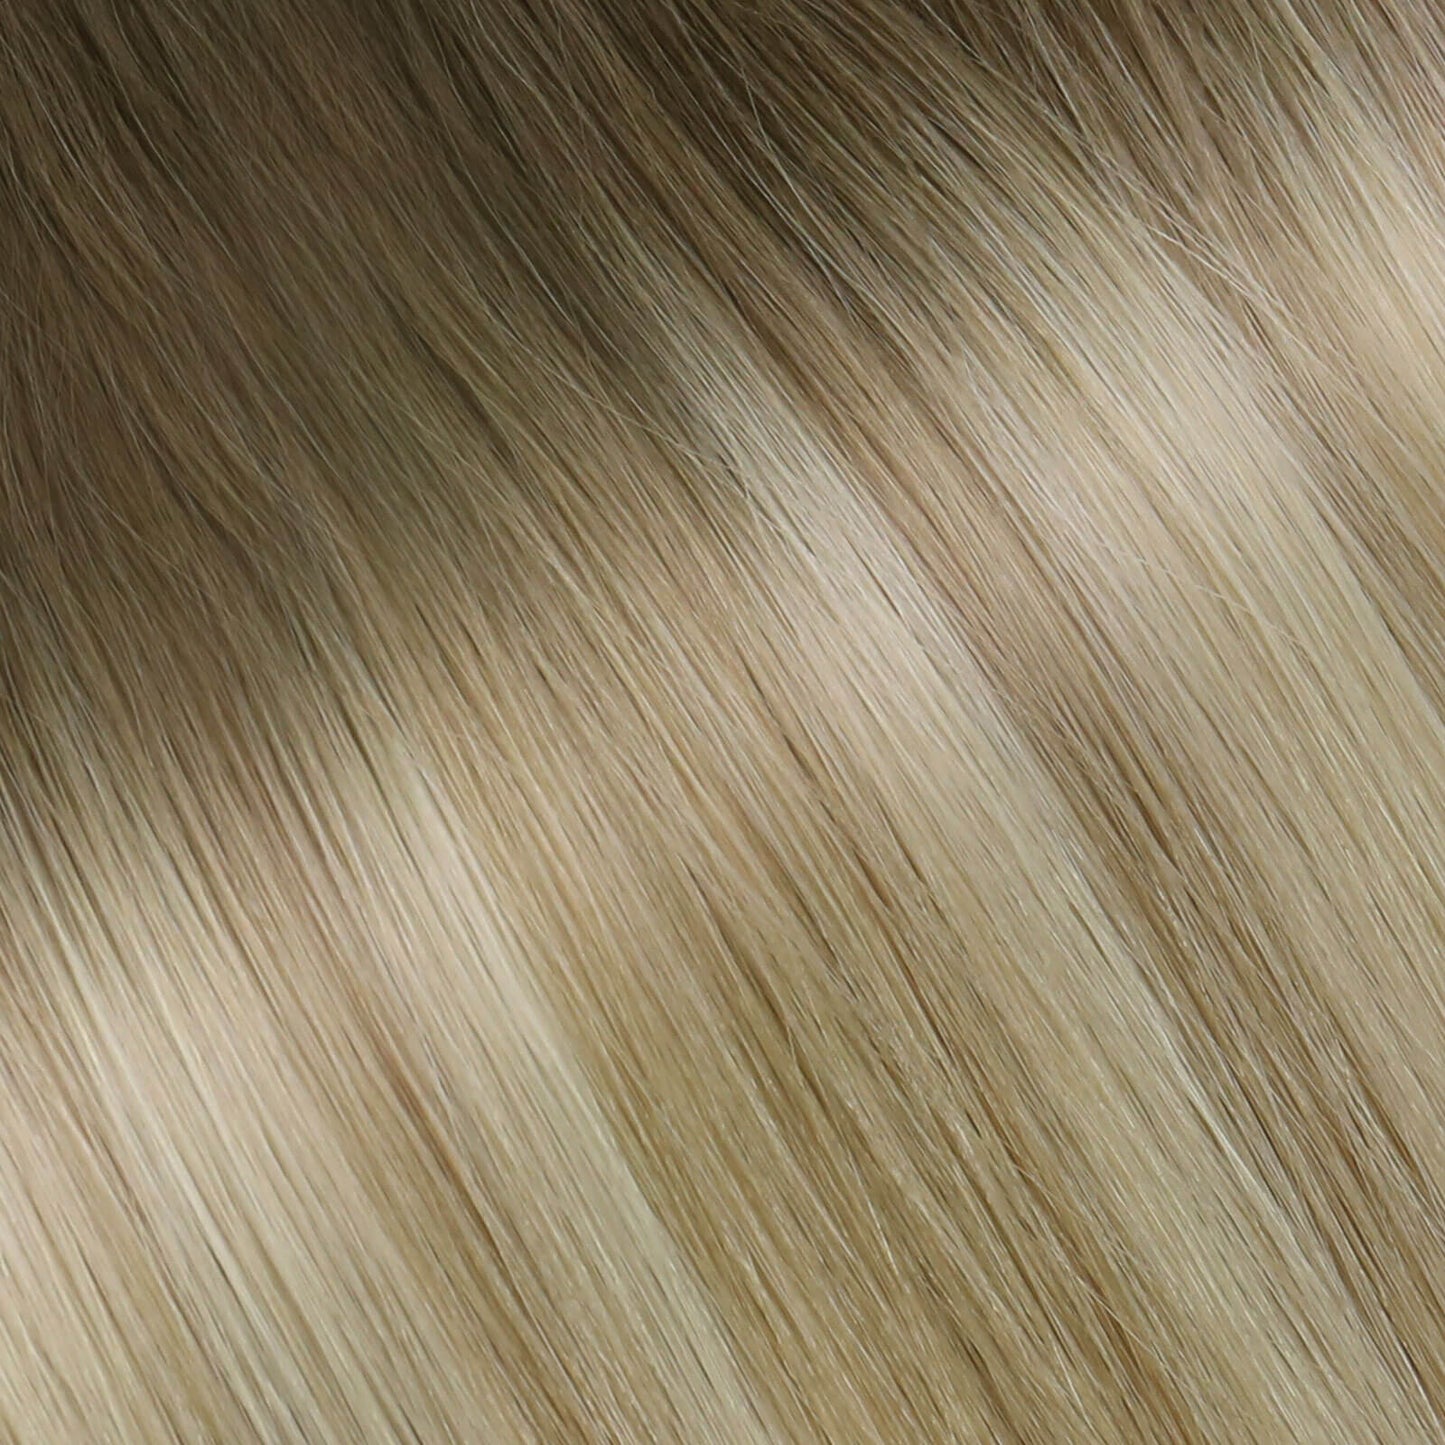 Hybrid weft balayage hair extensions weft